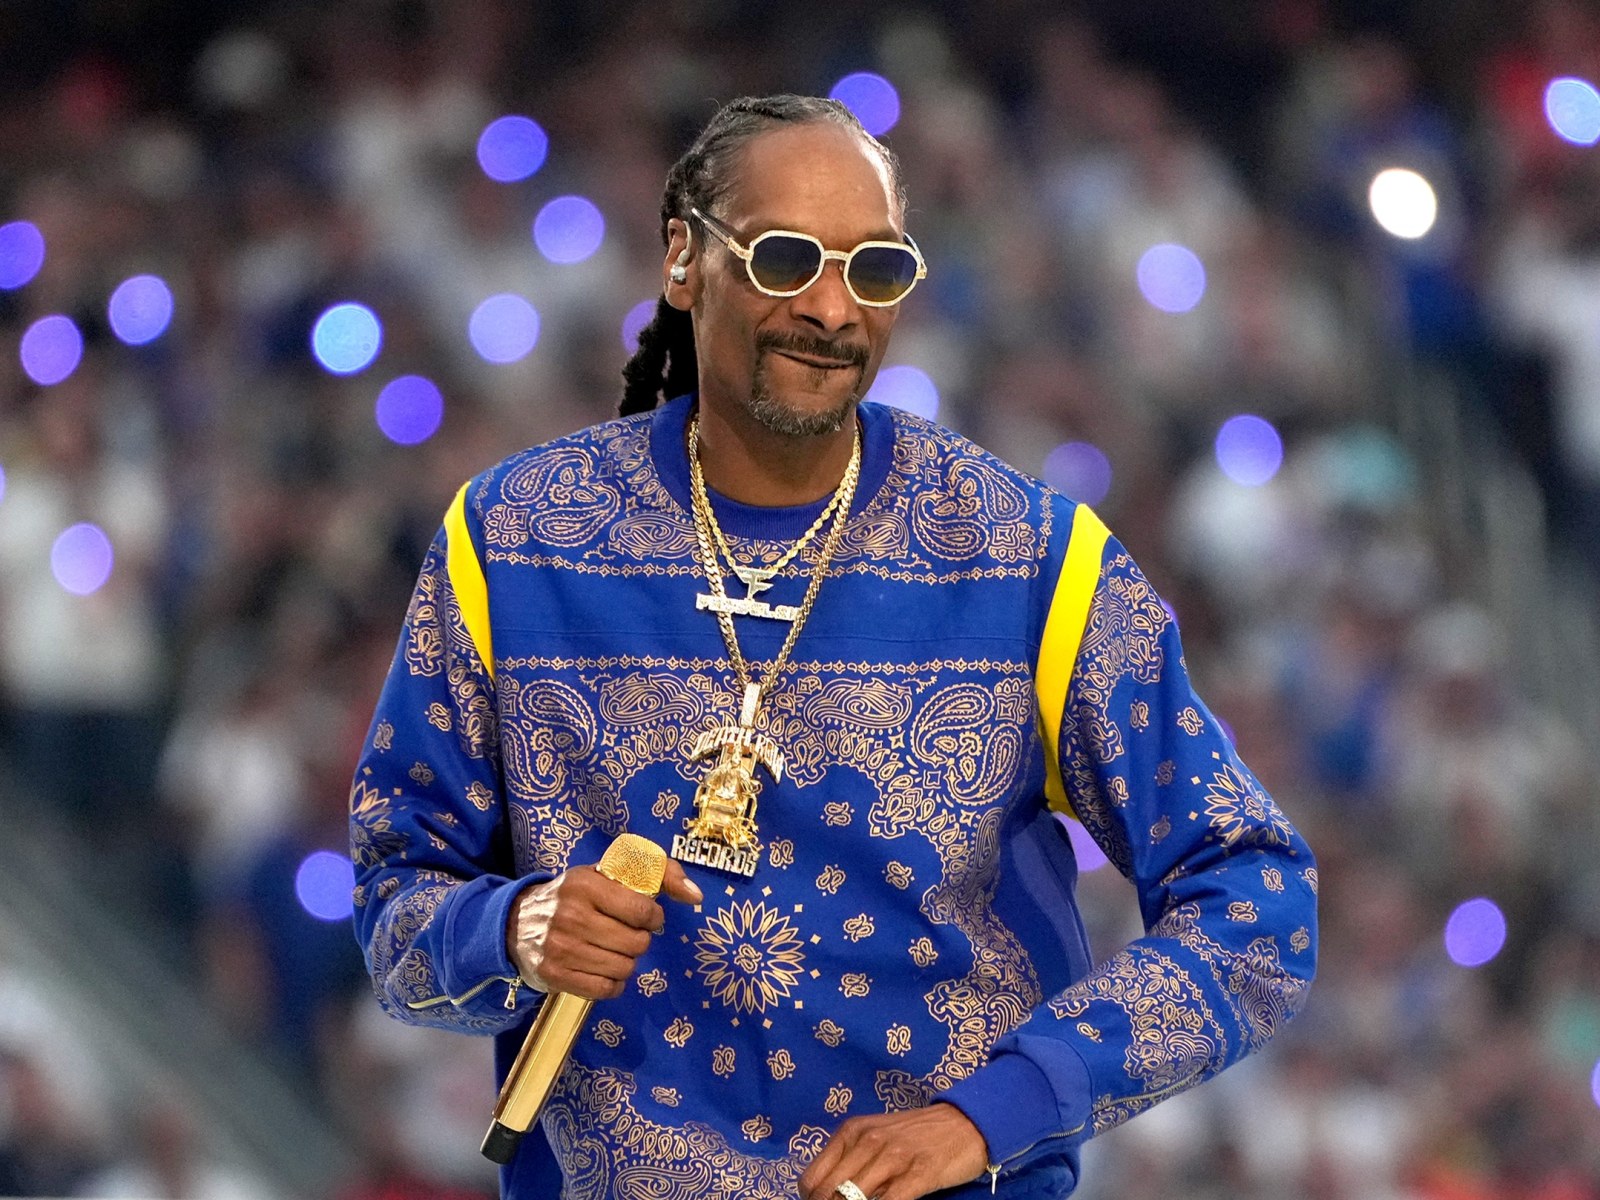 Snoop Dogg's Super Bowl Halftime Performance Boycotted by Police Group